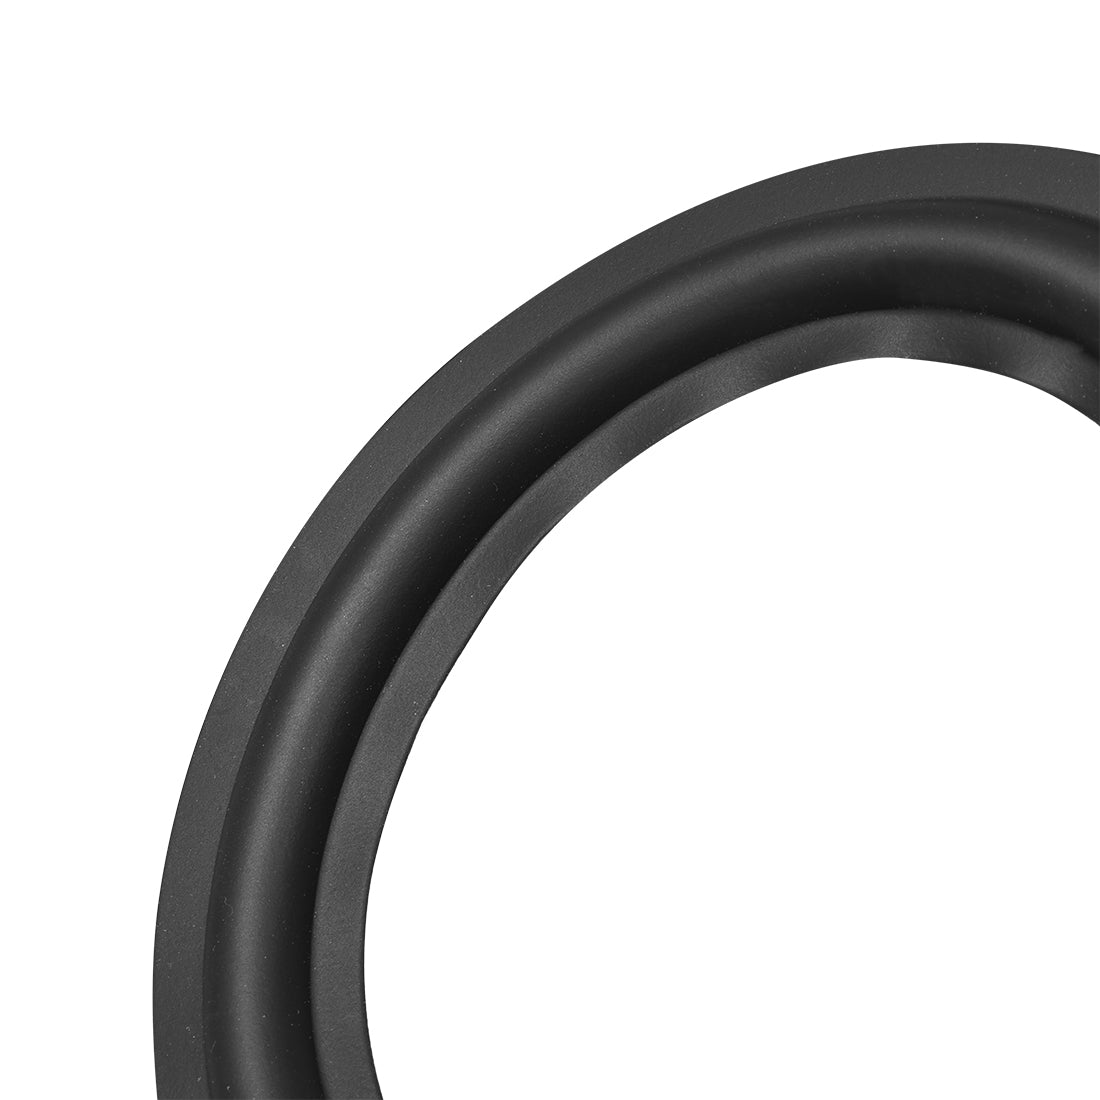 uxcell Uxcell 5" 5inch Rubber Edge Surround Rings Replacement Part for Repair or DIY 2pcs